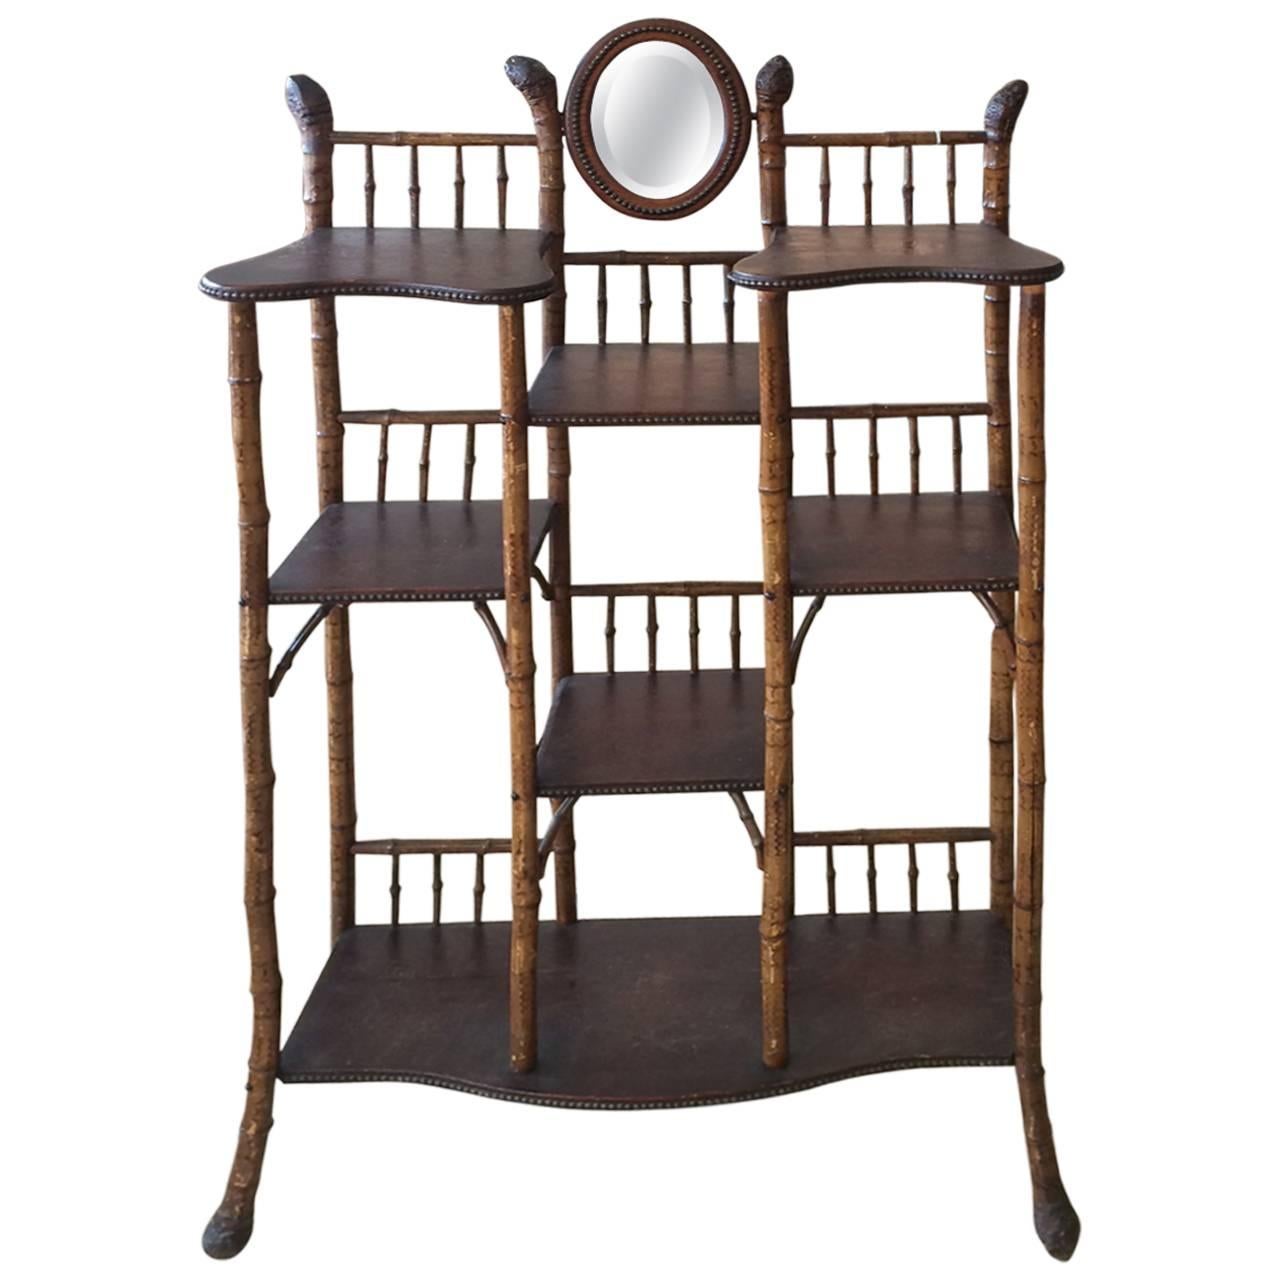 Vintage Bamboo and Wood Etagere 